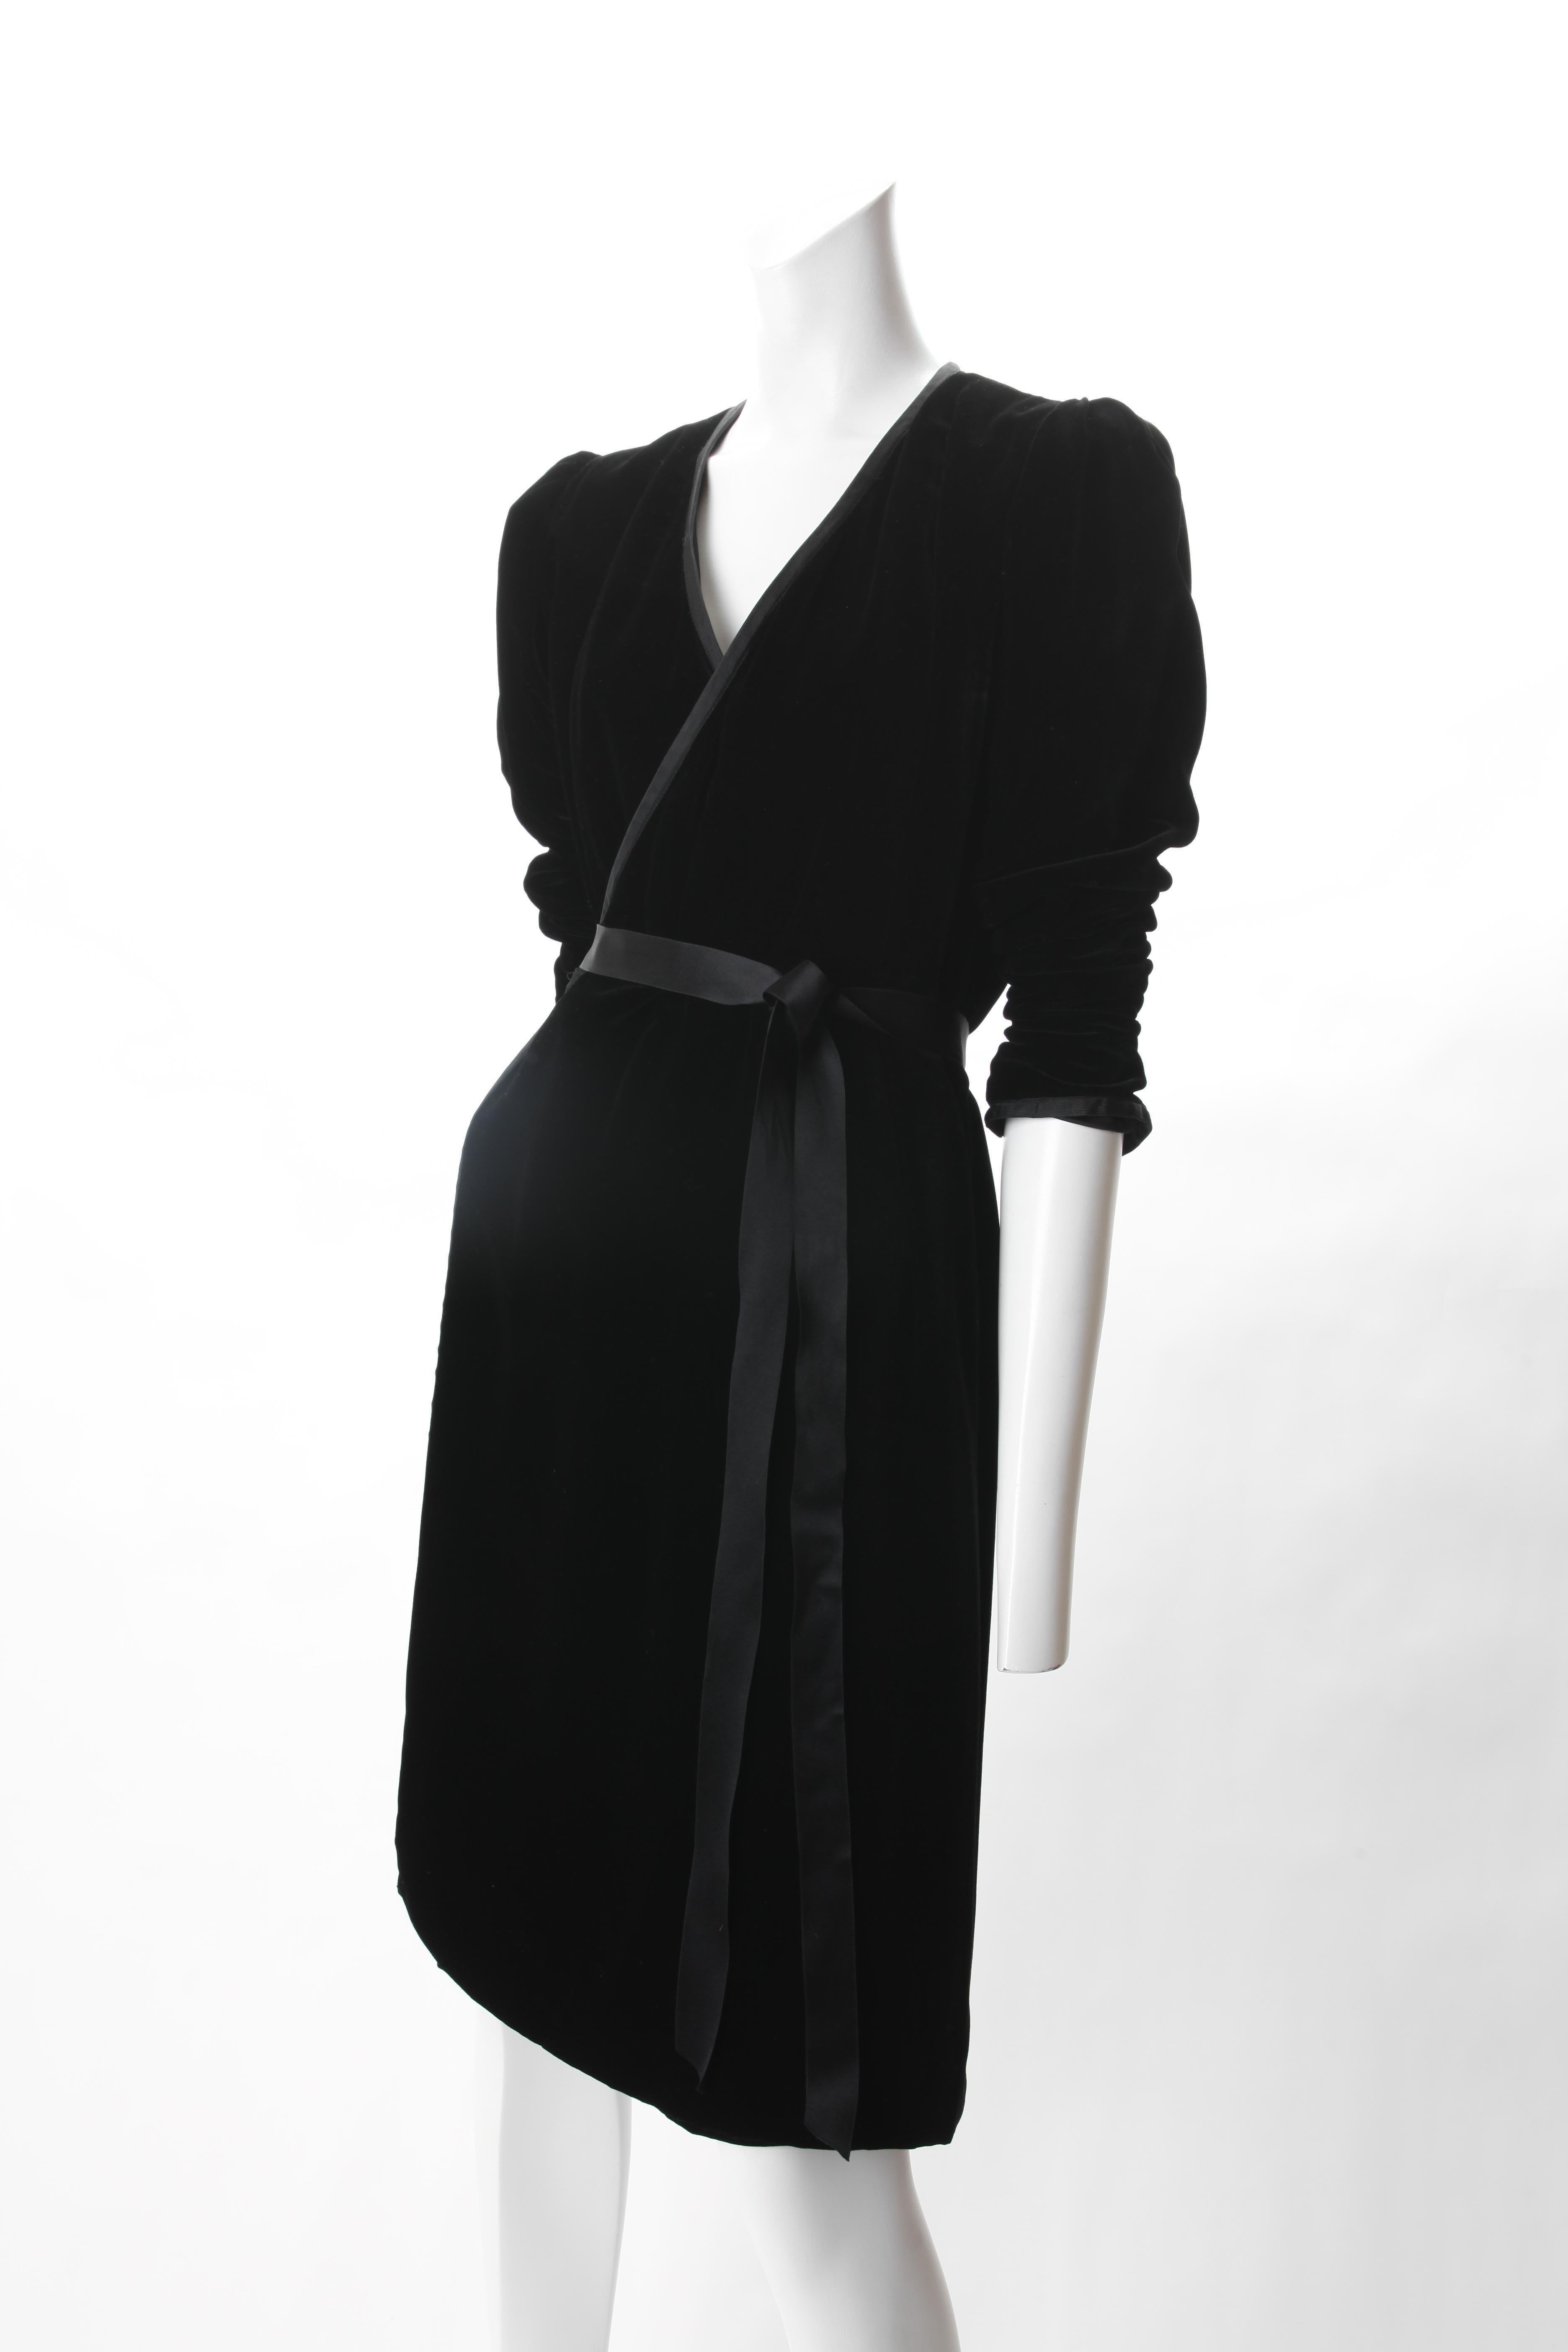 Yves Saint Laurent Rive Gauche Black Velvet Wrap Dress. c.1980s.
Yves Saint Laurent Black Velvet Wrap Dress featuring Grosgrain piping border all around and at cuff of puff sleeve. Silk lined with silk self tie closure at waist.

Marked Size EU